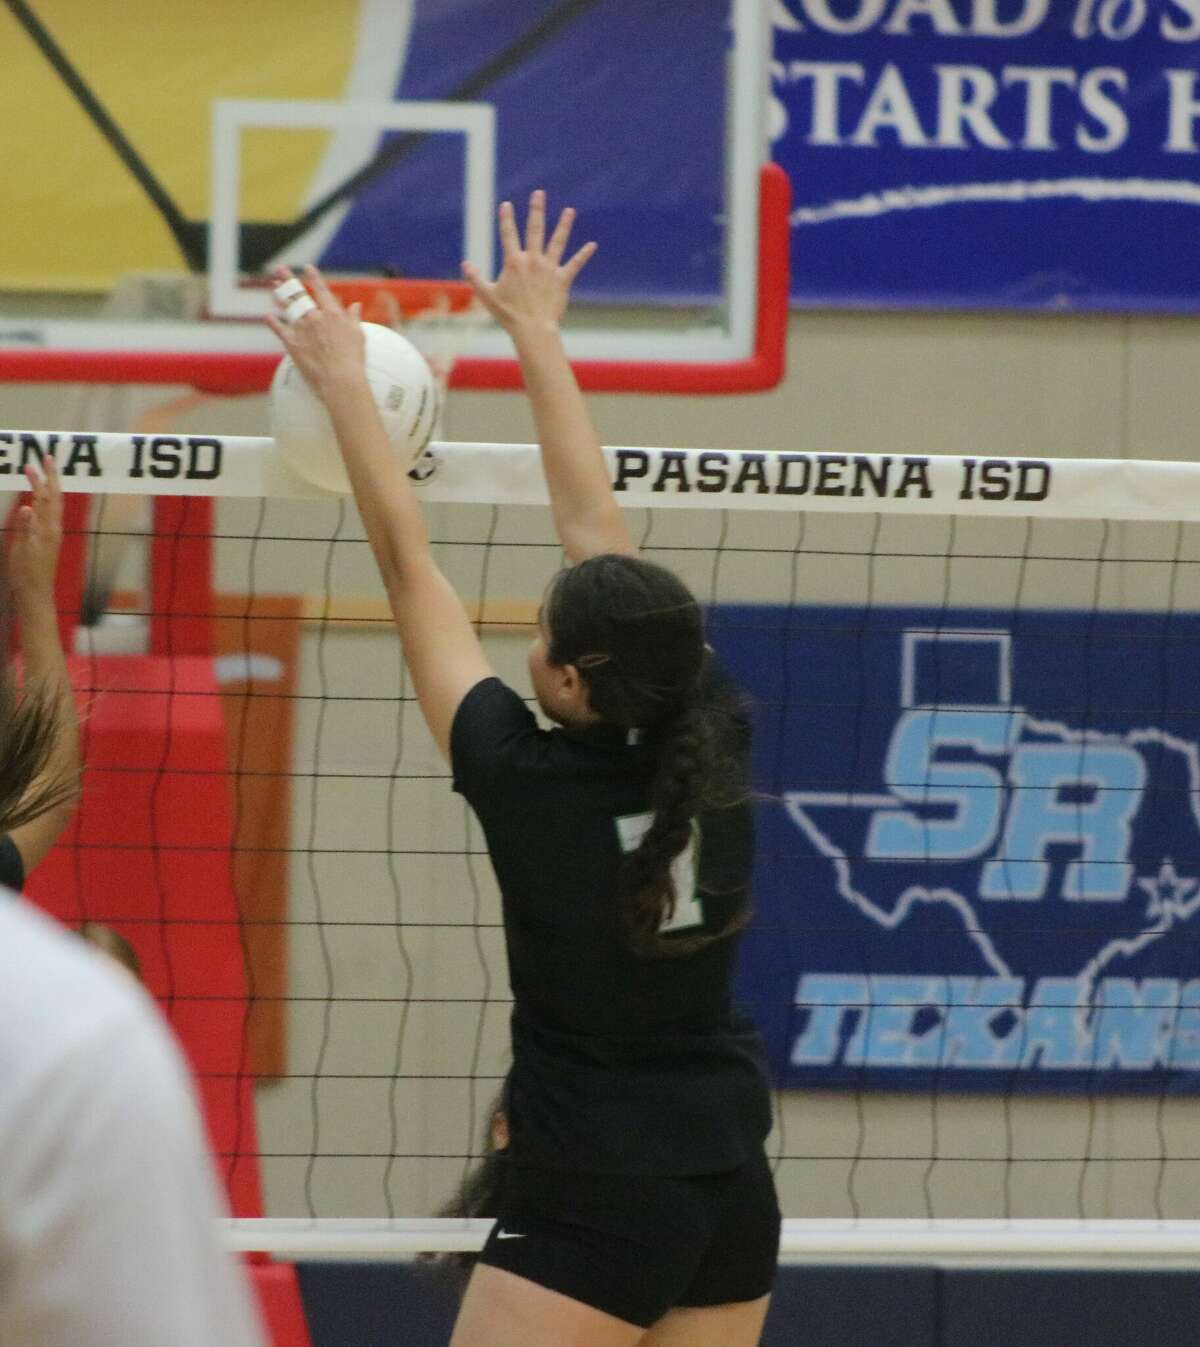 It looks like a block attempt by Rosalinda Navarro isn't going to work this time during Game 2 action Tuesday night.